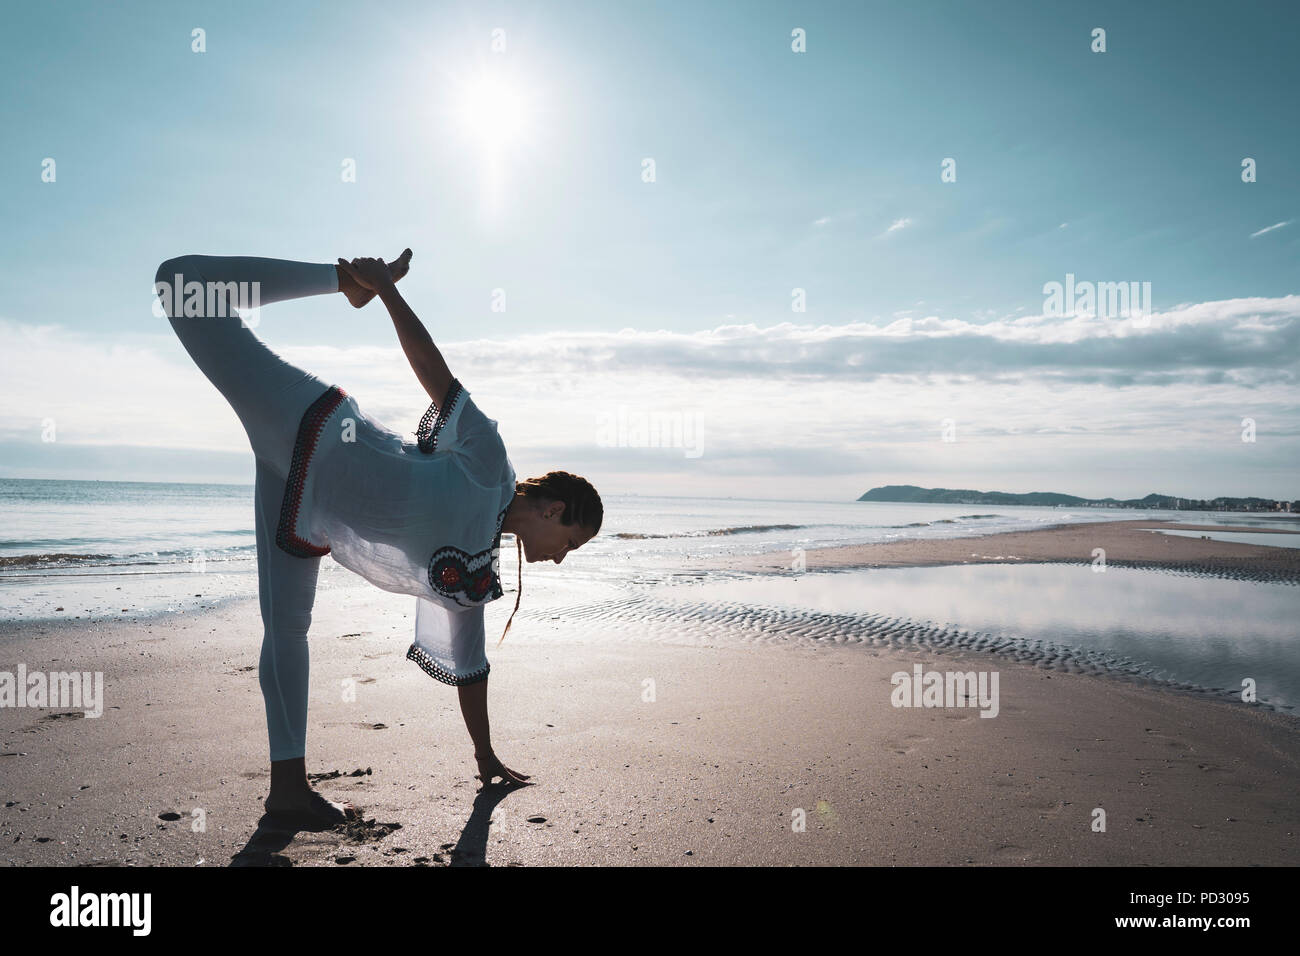 Woman practicing yoga on beach Banque D'Images